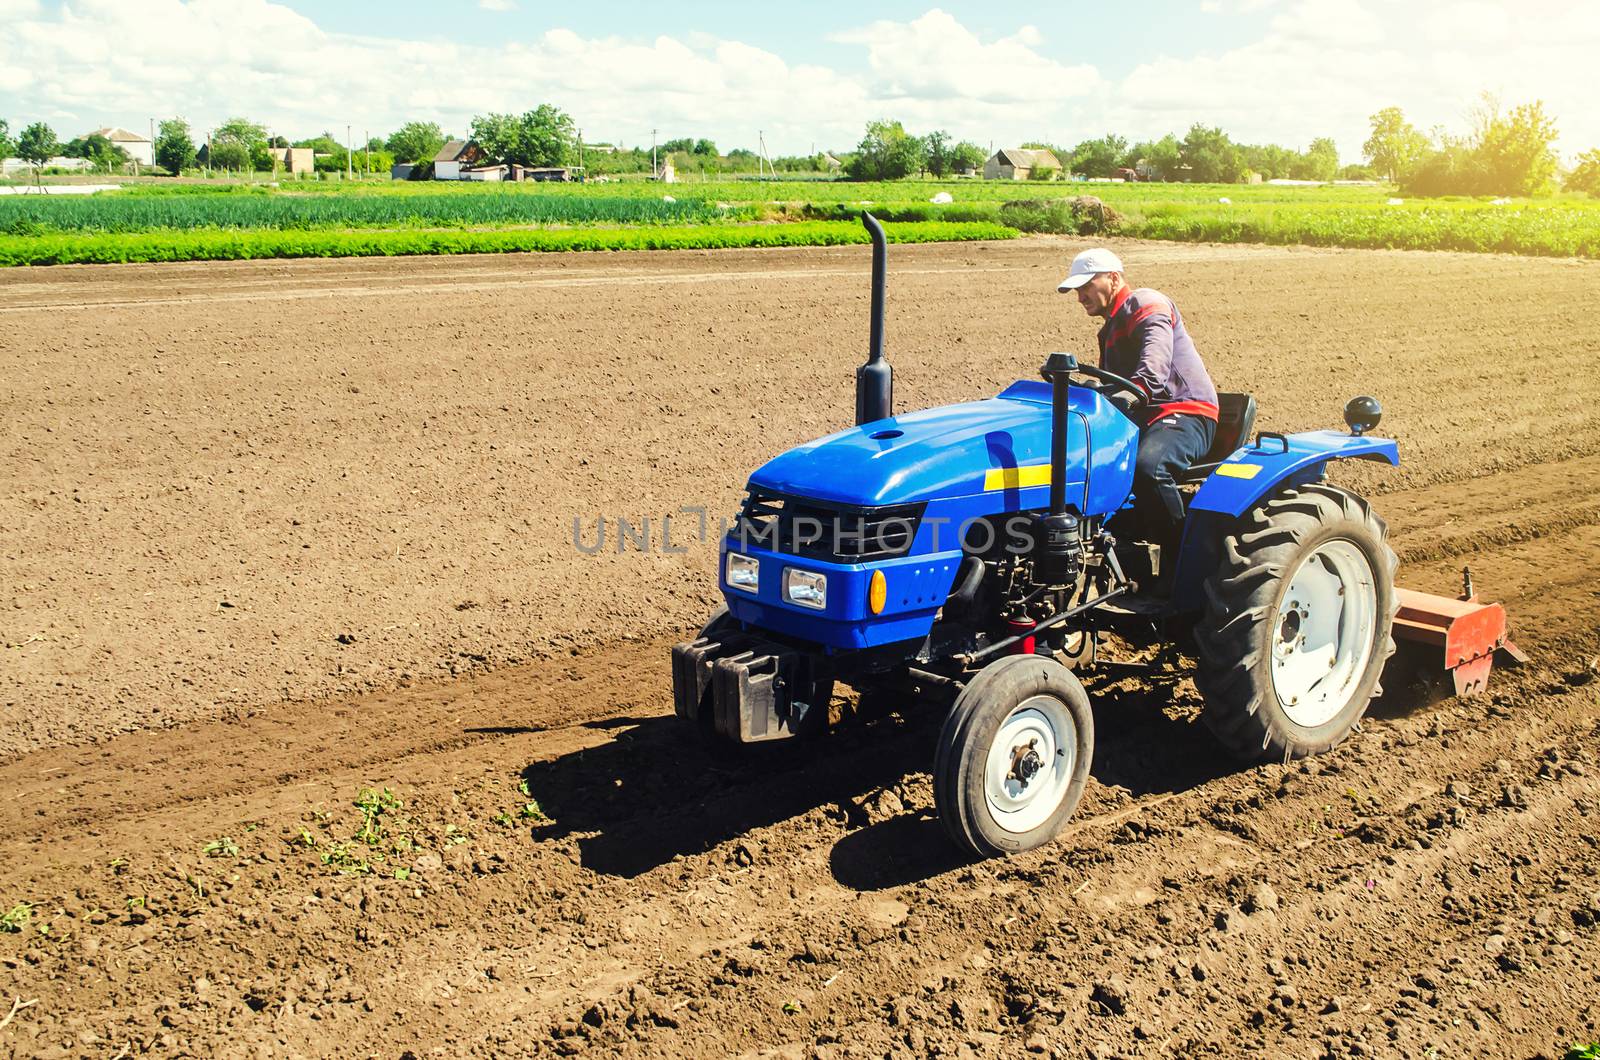 Farmer on a tractor with a milling machine processes loosens soil in the farm field. Grind and mix soil on plantation. Preparation for new crop planting. Loosening surface, cultivating the land. by iLixe48